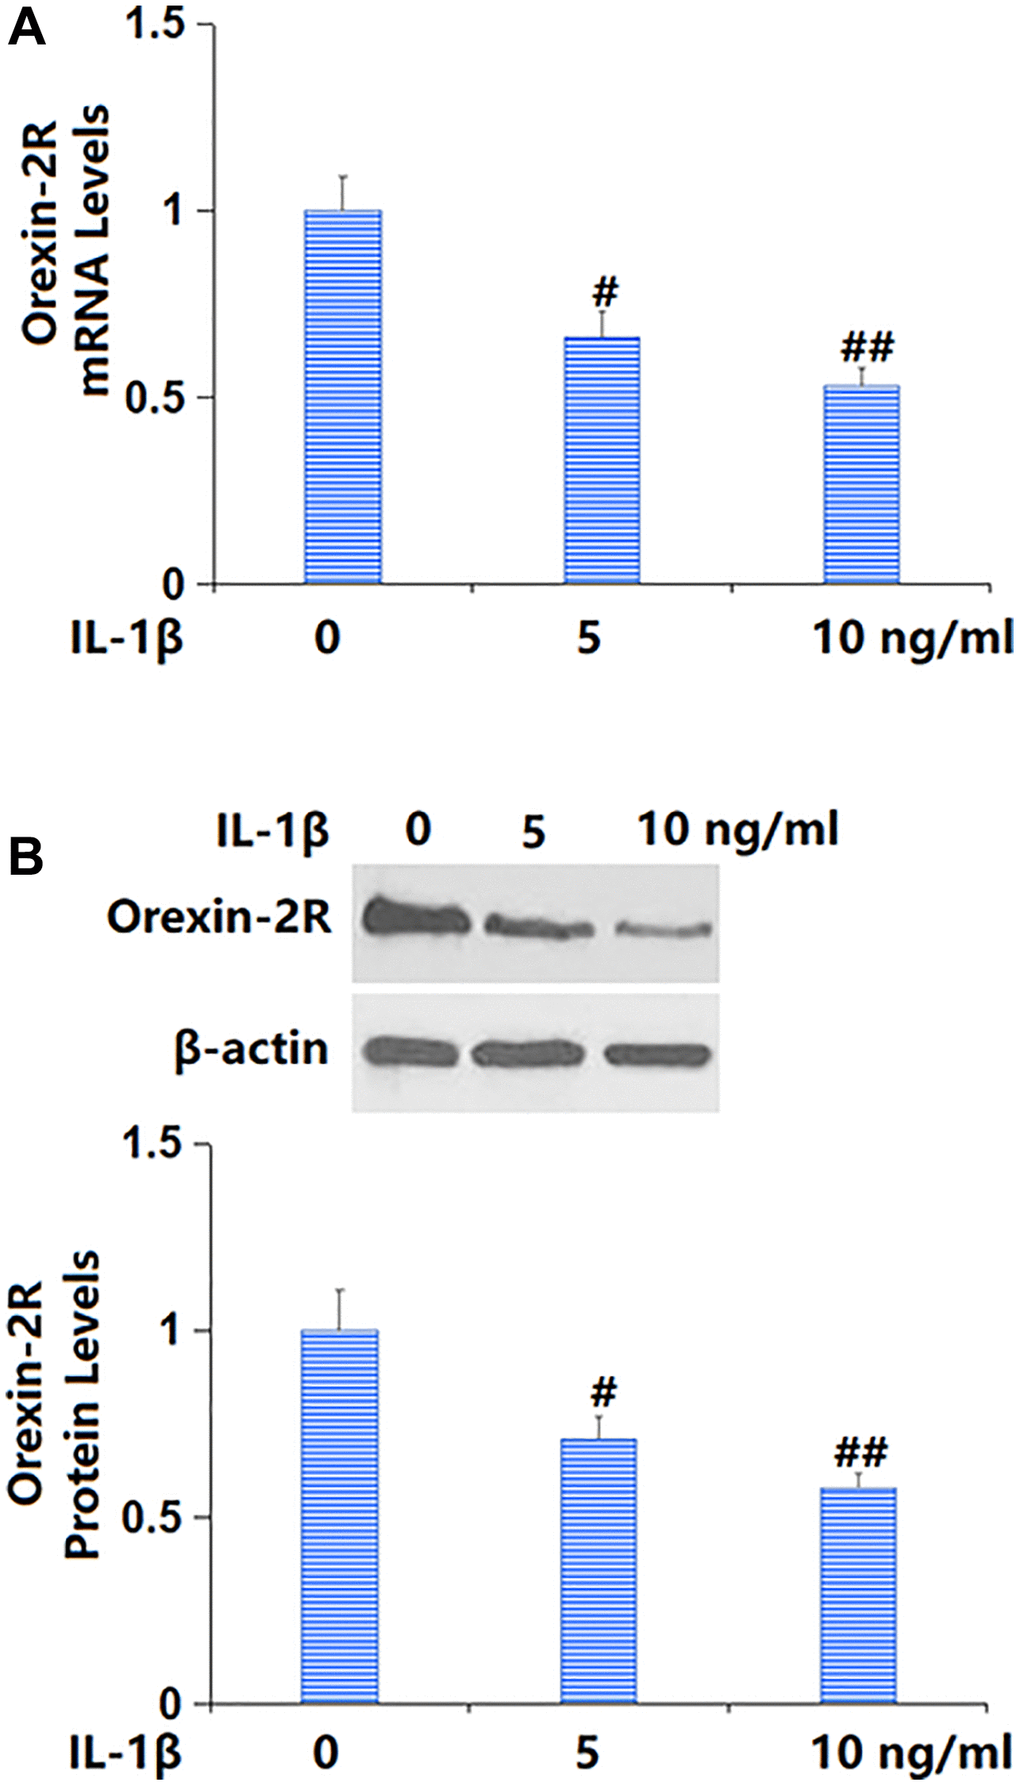 Exposure to IL-1β reduced the expression of orexin-2 receptor (orexin-2R) in TC-28a2 chondrocytes in a dose-dependent manner. Cells were stimulated with IL-1β (5, 10 ng/ml) for 24 hours. (A) mRNA levels of orexin-2R; (B) Protein levels of orexin-2R (#, ##P n = 6).